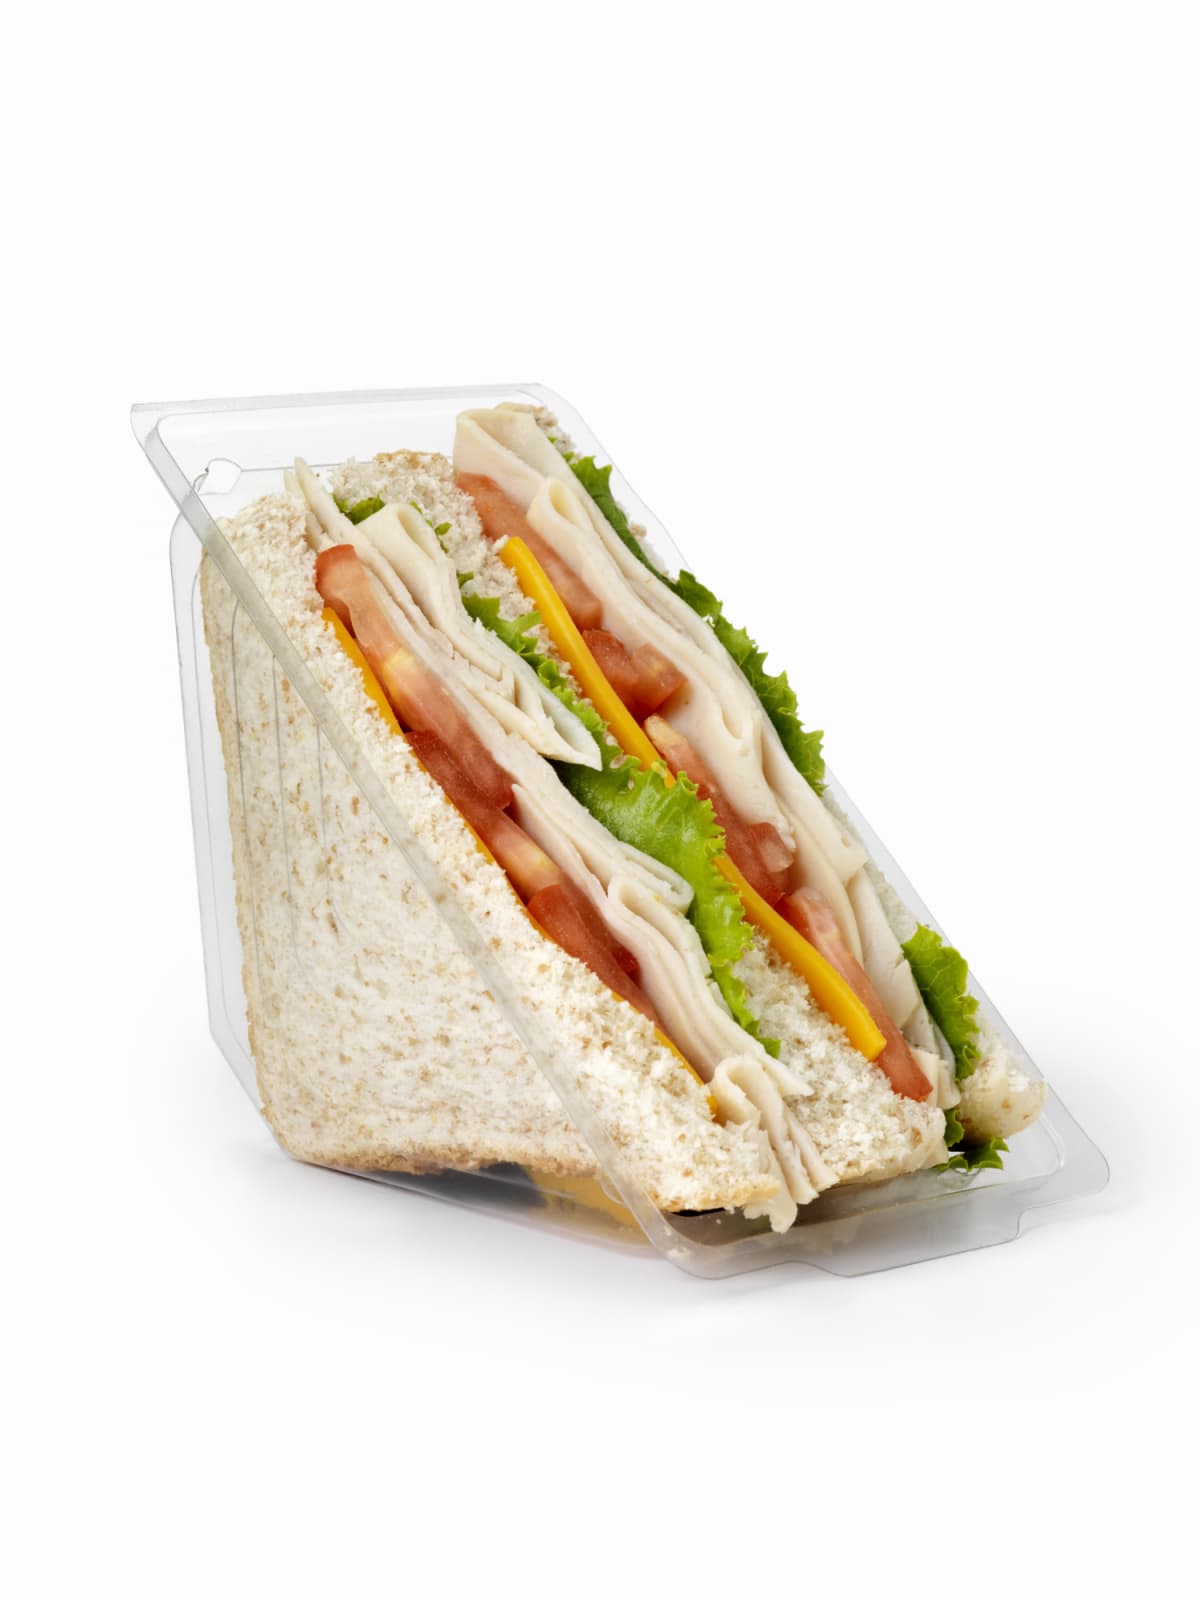 Turkey and Cheddar Cheese Sandwich with Lettuce and Tomato in a Plastic Take out Container-Photographed on Hasselblad H3D2-39mb Camera